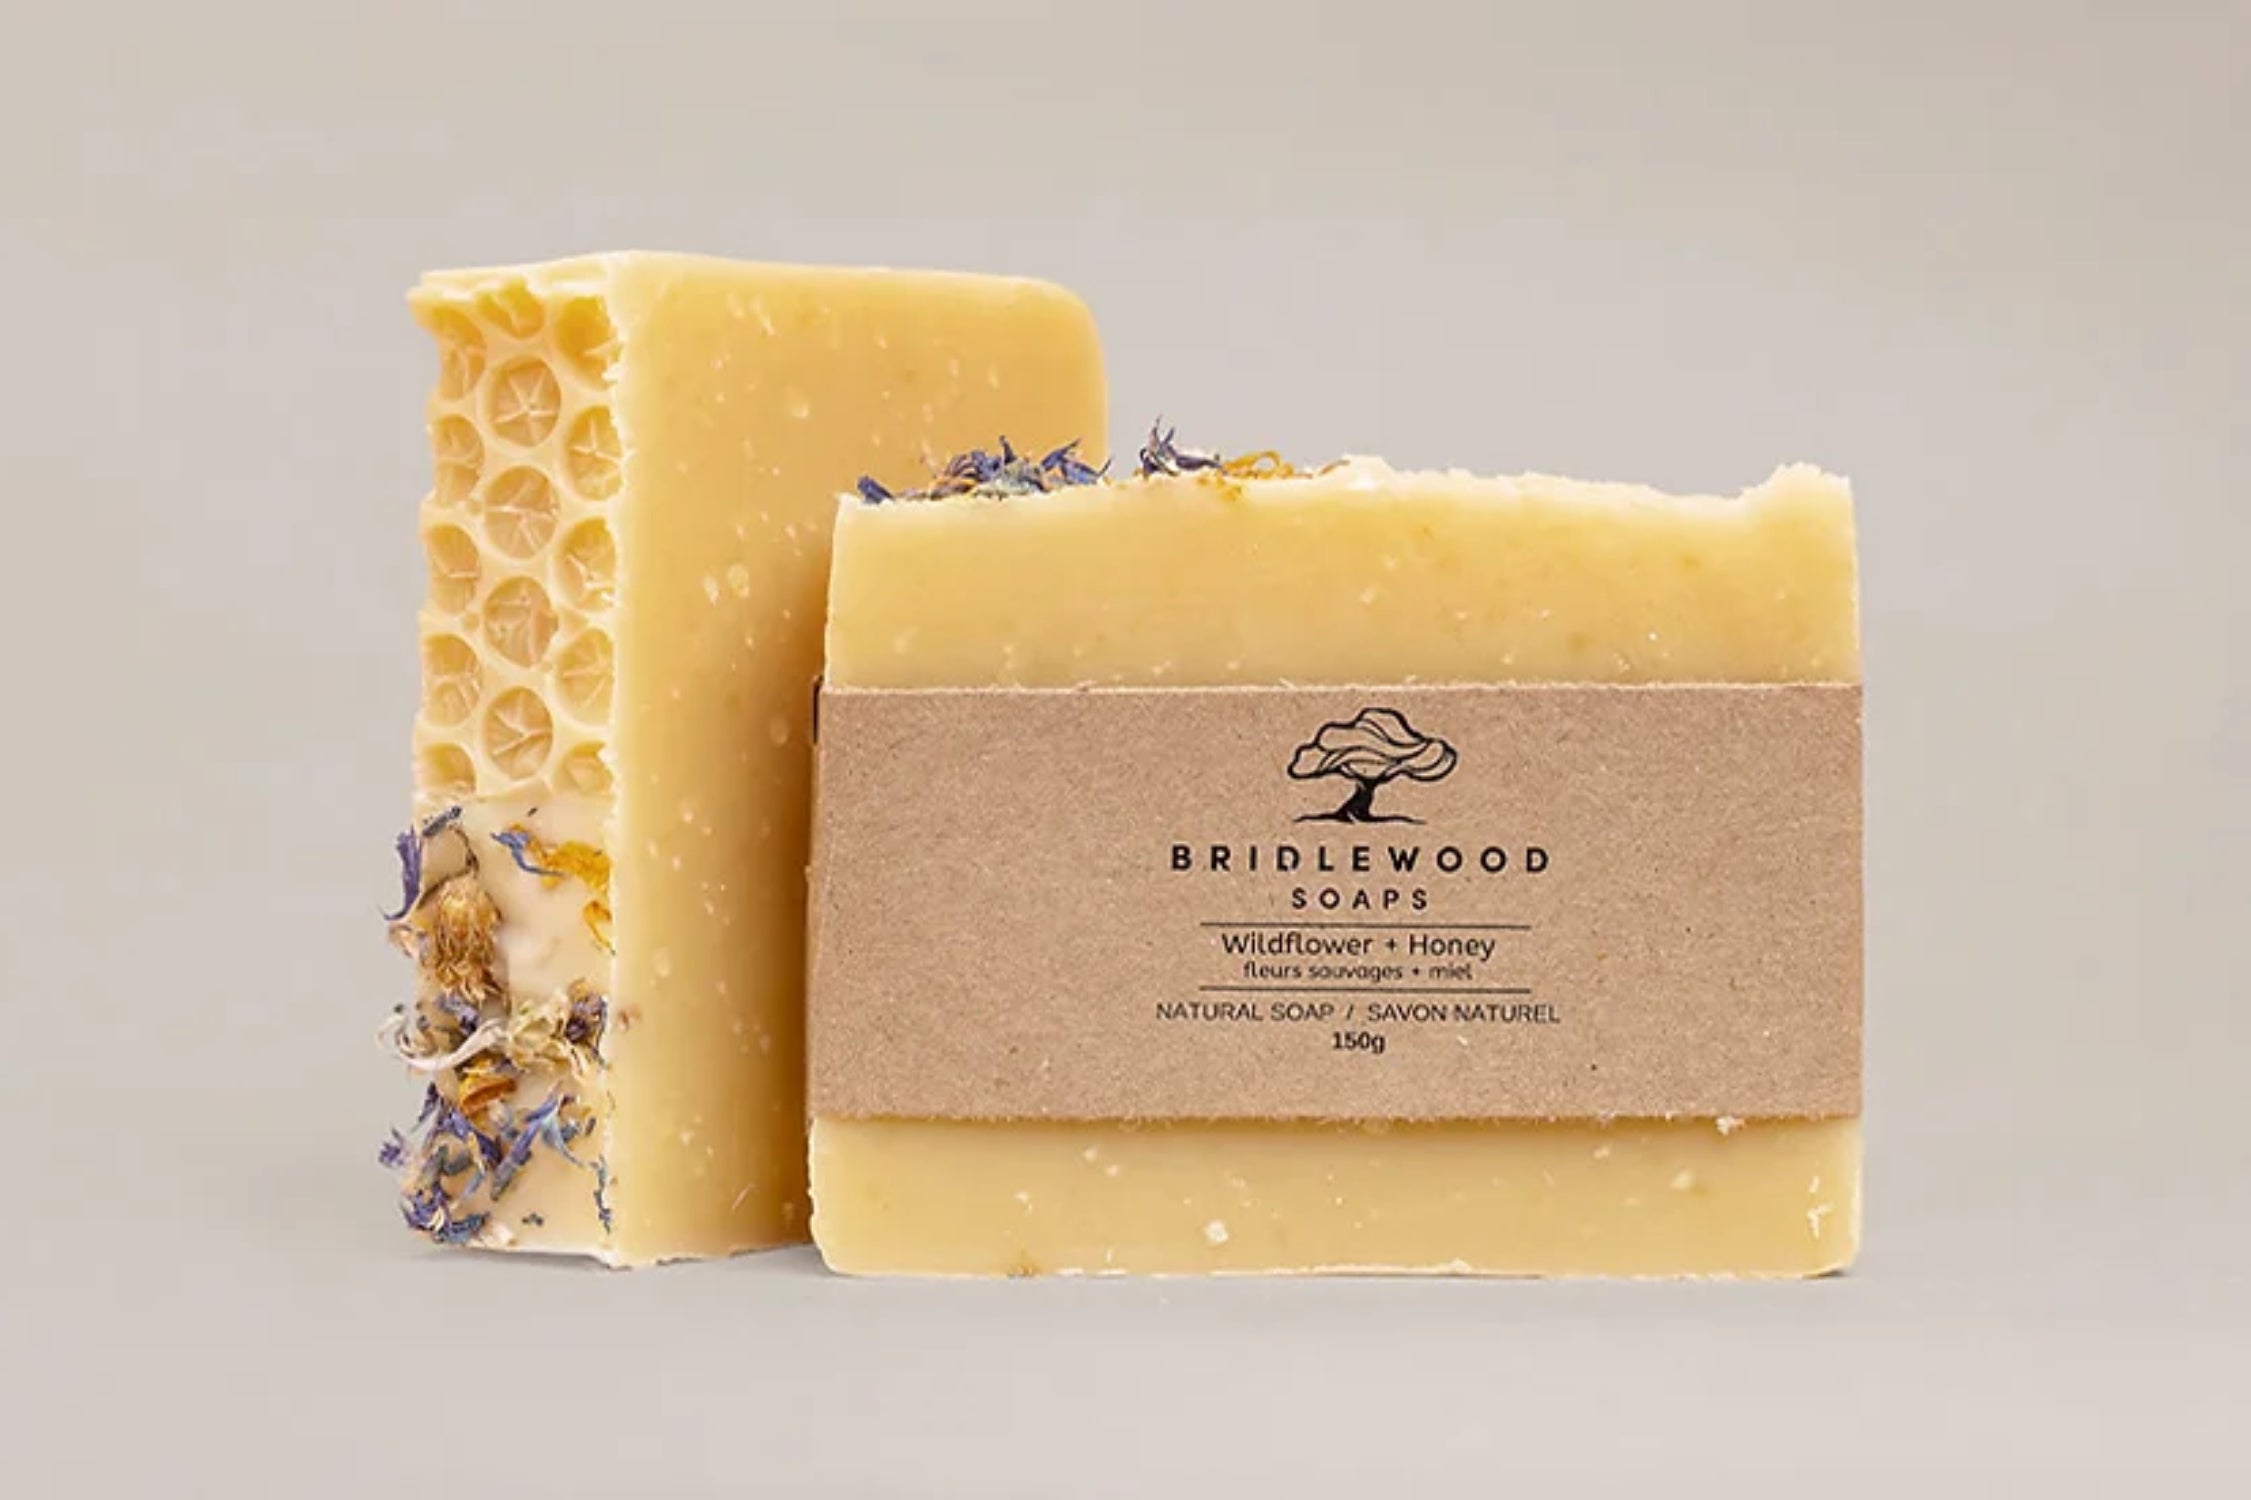 Wildflower and Honey Soap Bar by Bridlewood Soaps